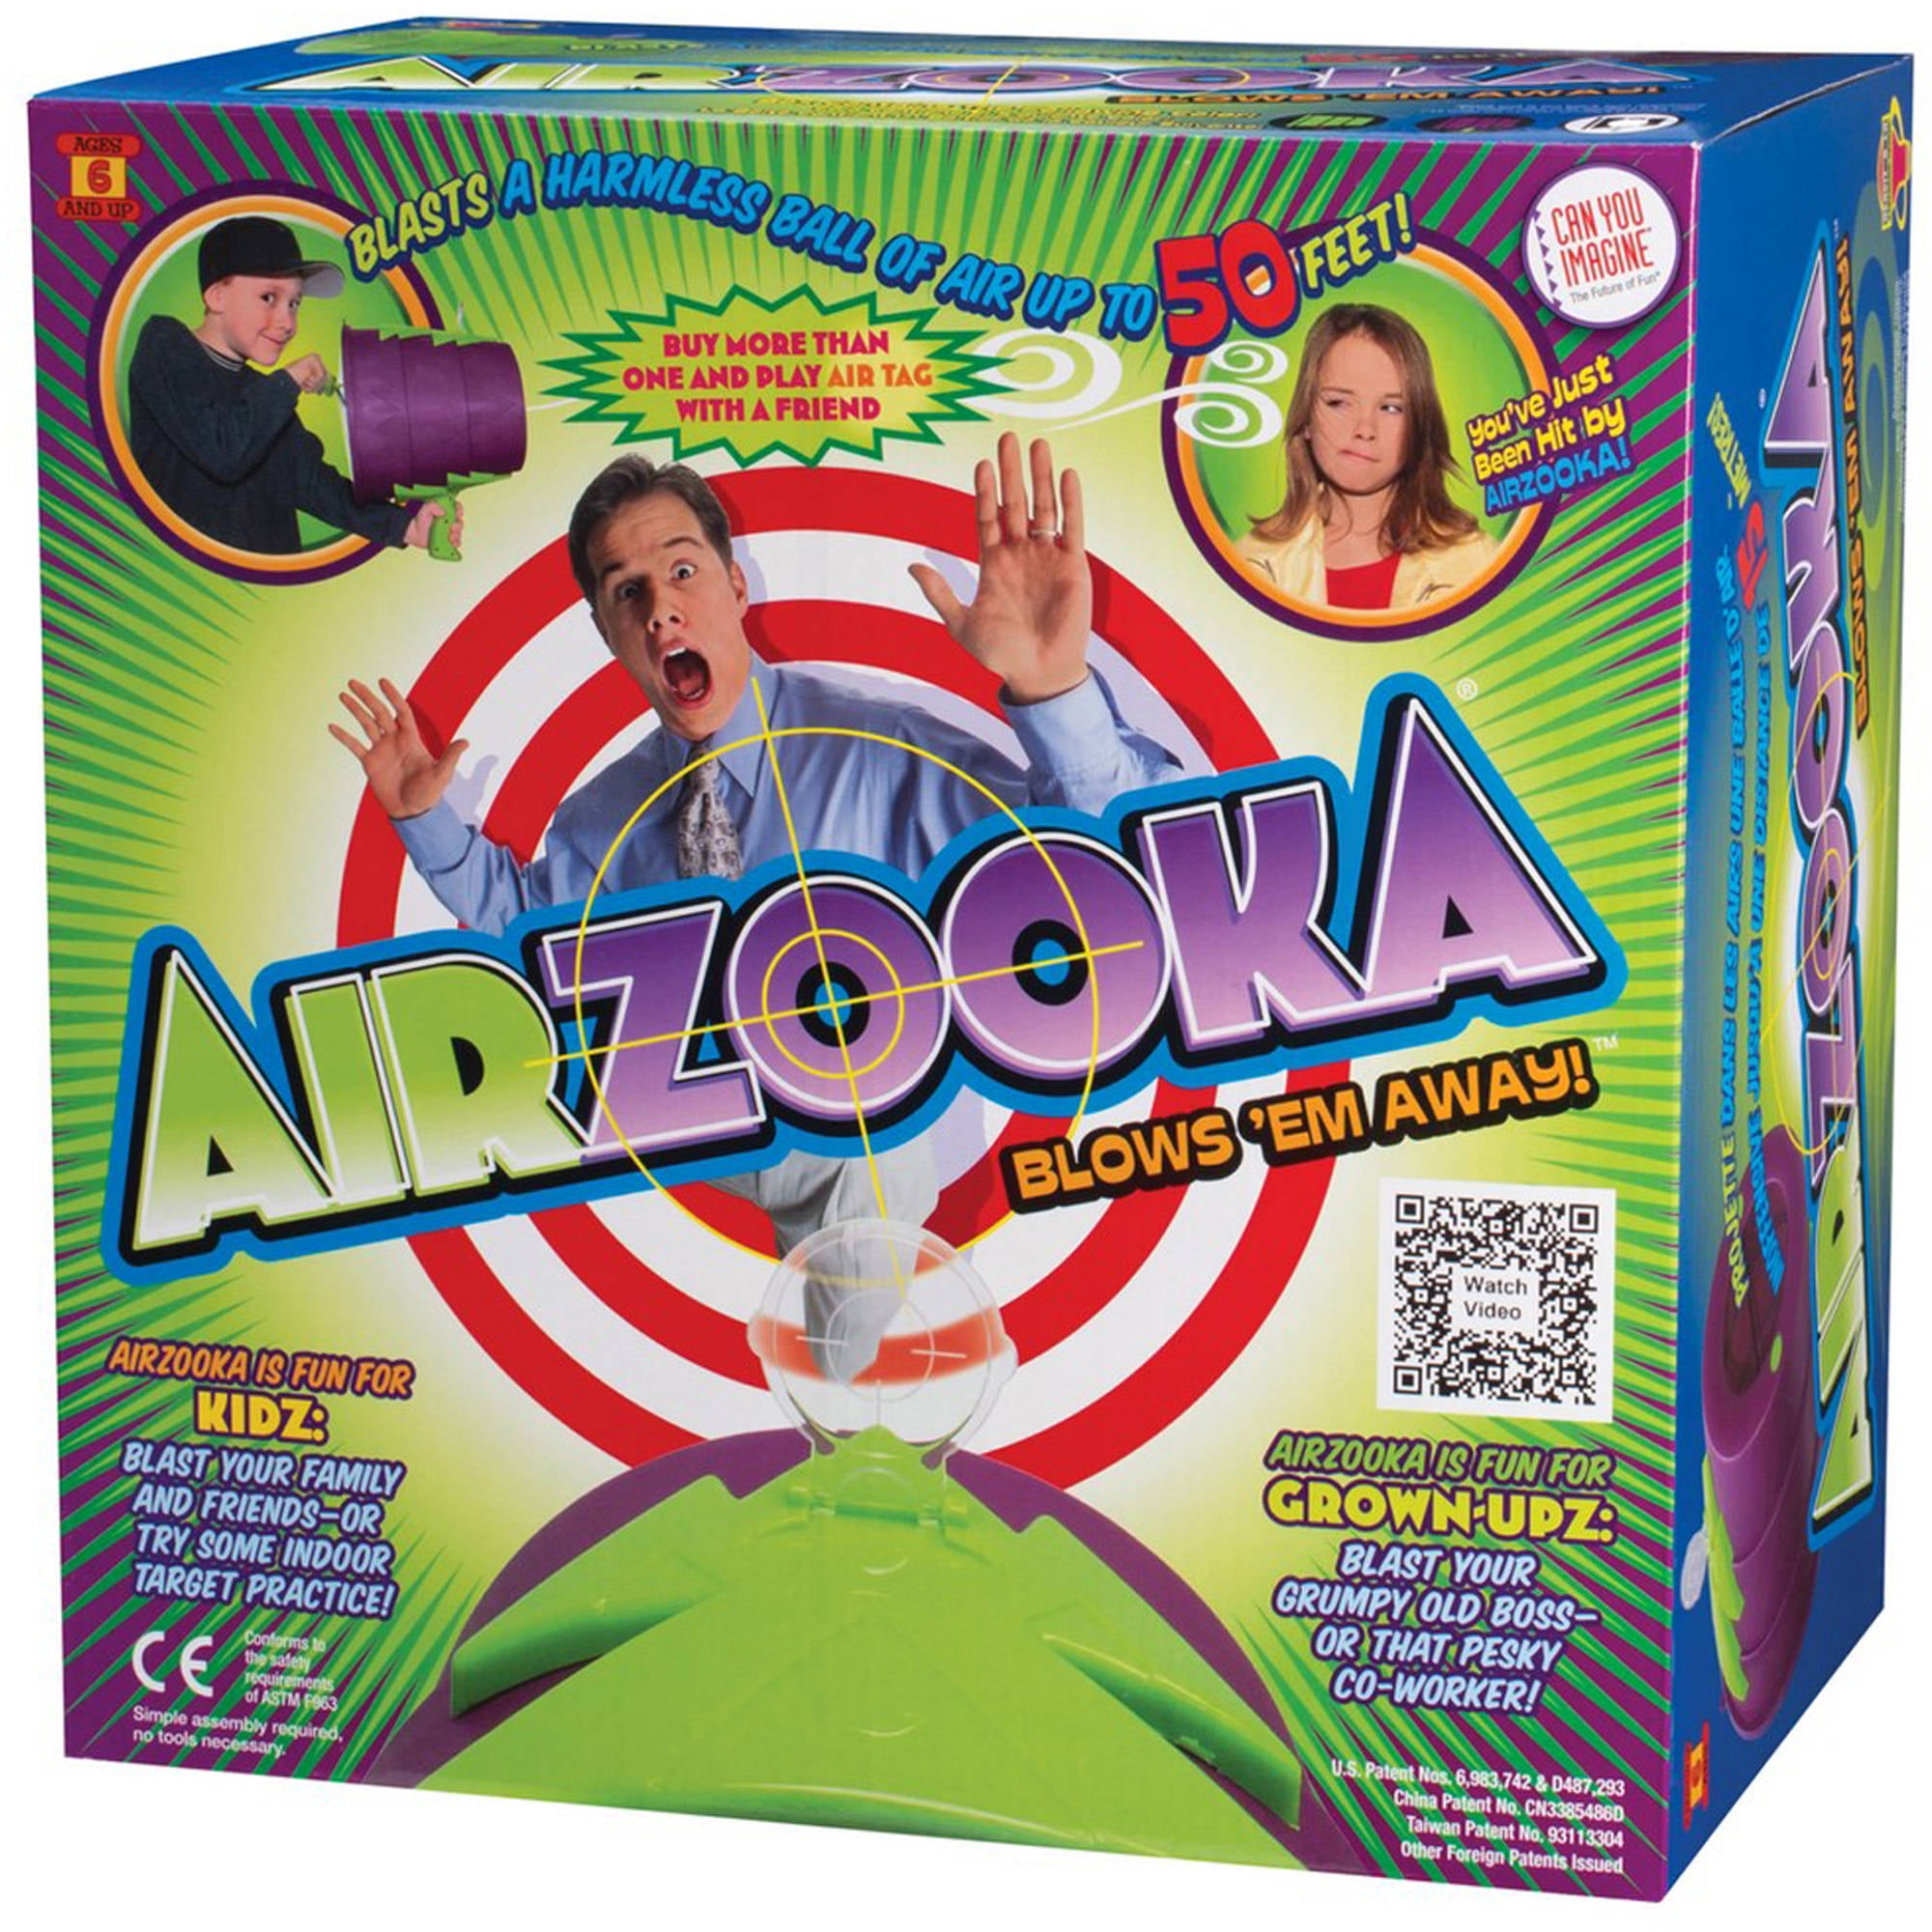 Can You Imagine Airzooka Toy Blue 50 Feet for sale online 